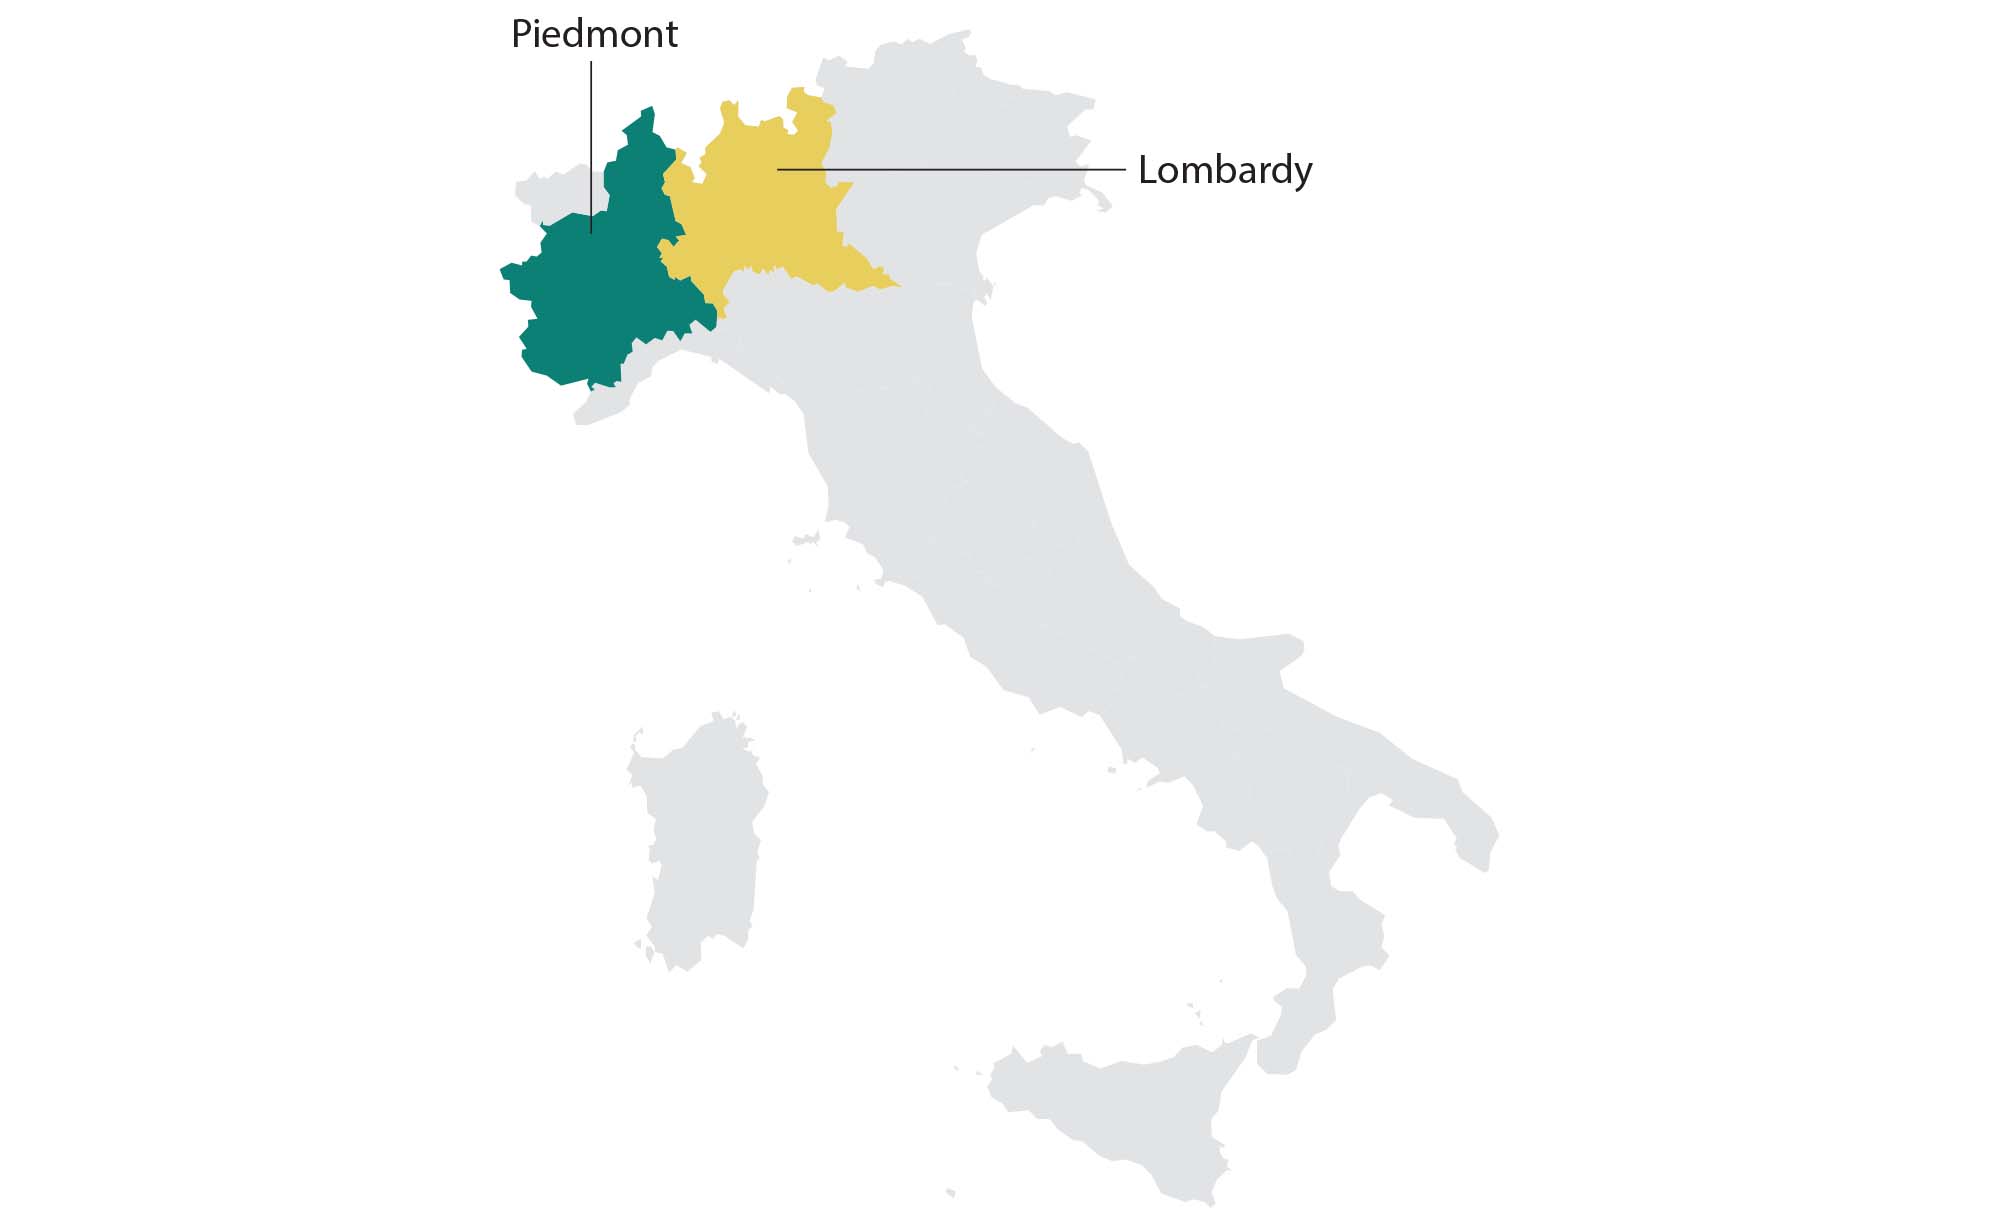 Map of the Northwest Italian wine making region: Piedmont and Lombardy.